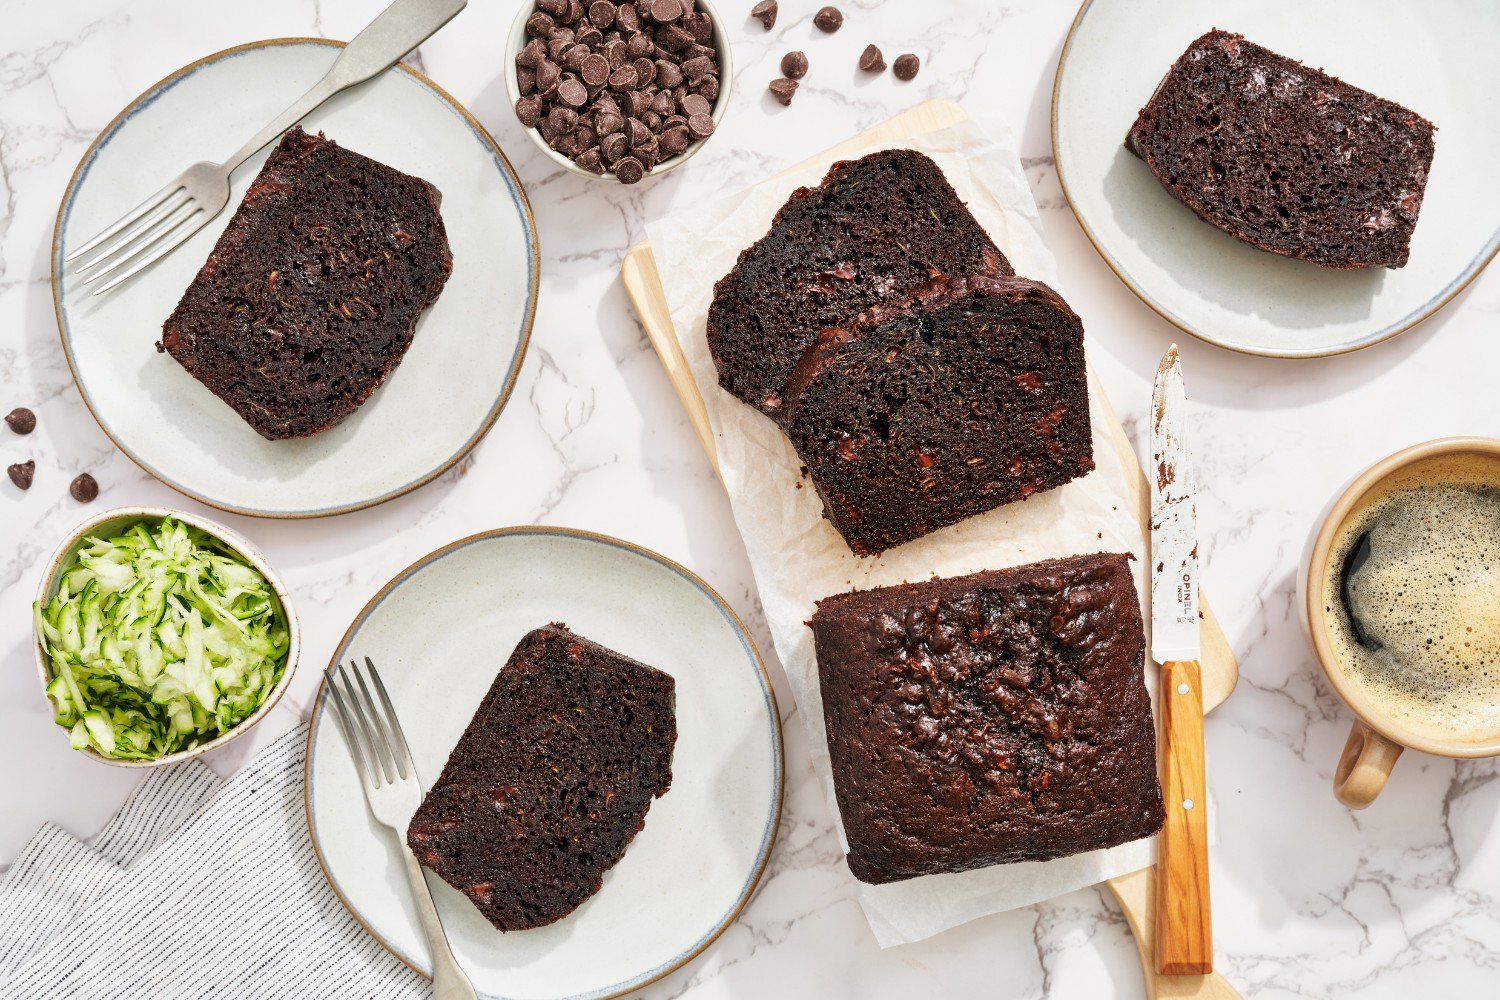 slices of chocolate zucchini bread on plates, ready to serve.